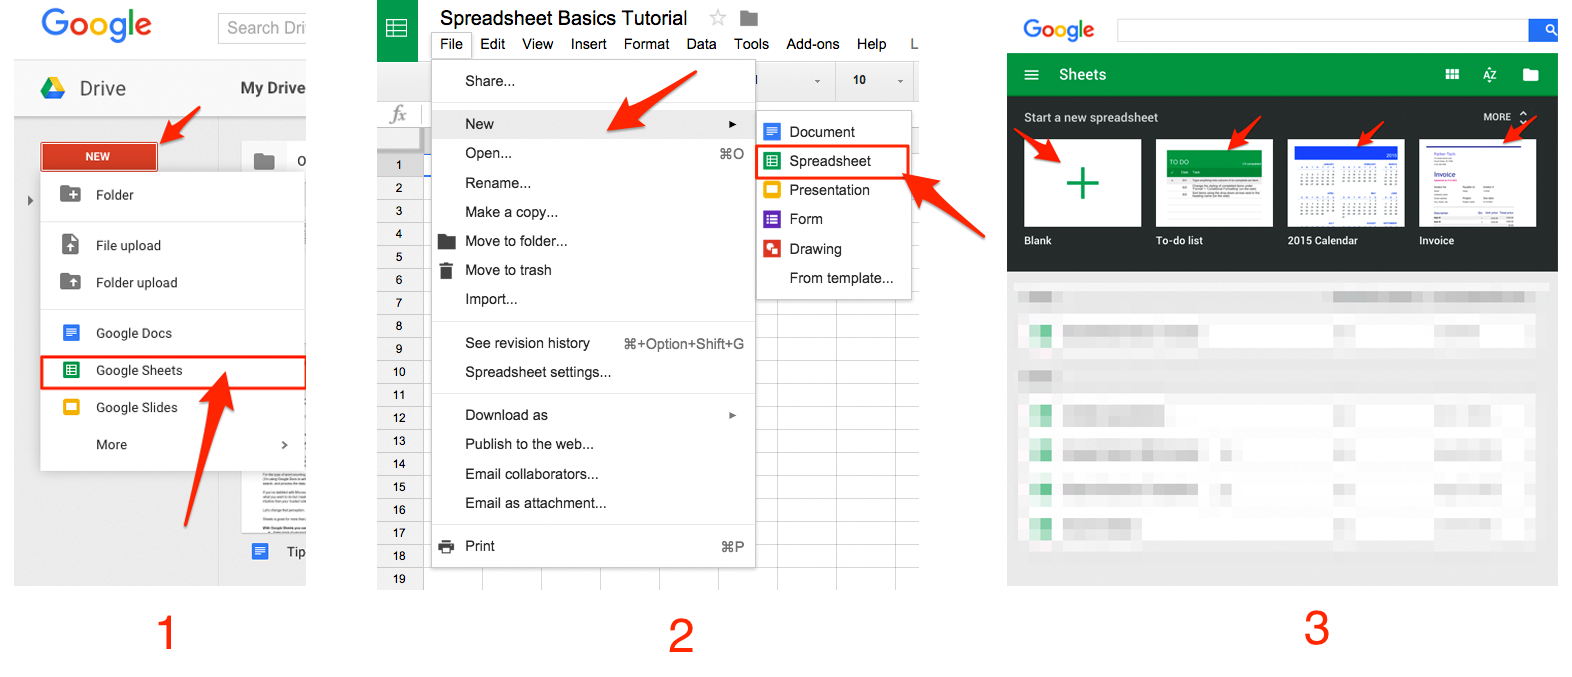 How To Do Excel Spreadsheets Tutorial In Google Sheets 101: The Beginner's Guide To Online Spreadsheets  The